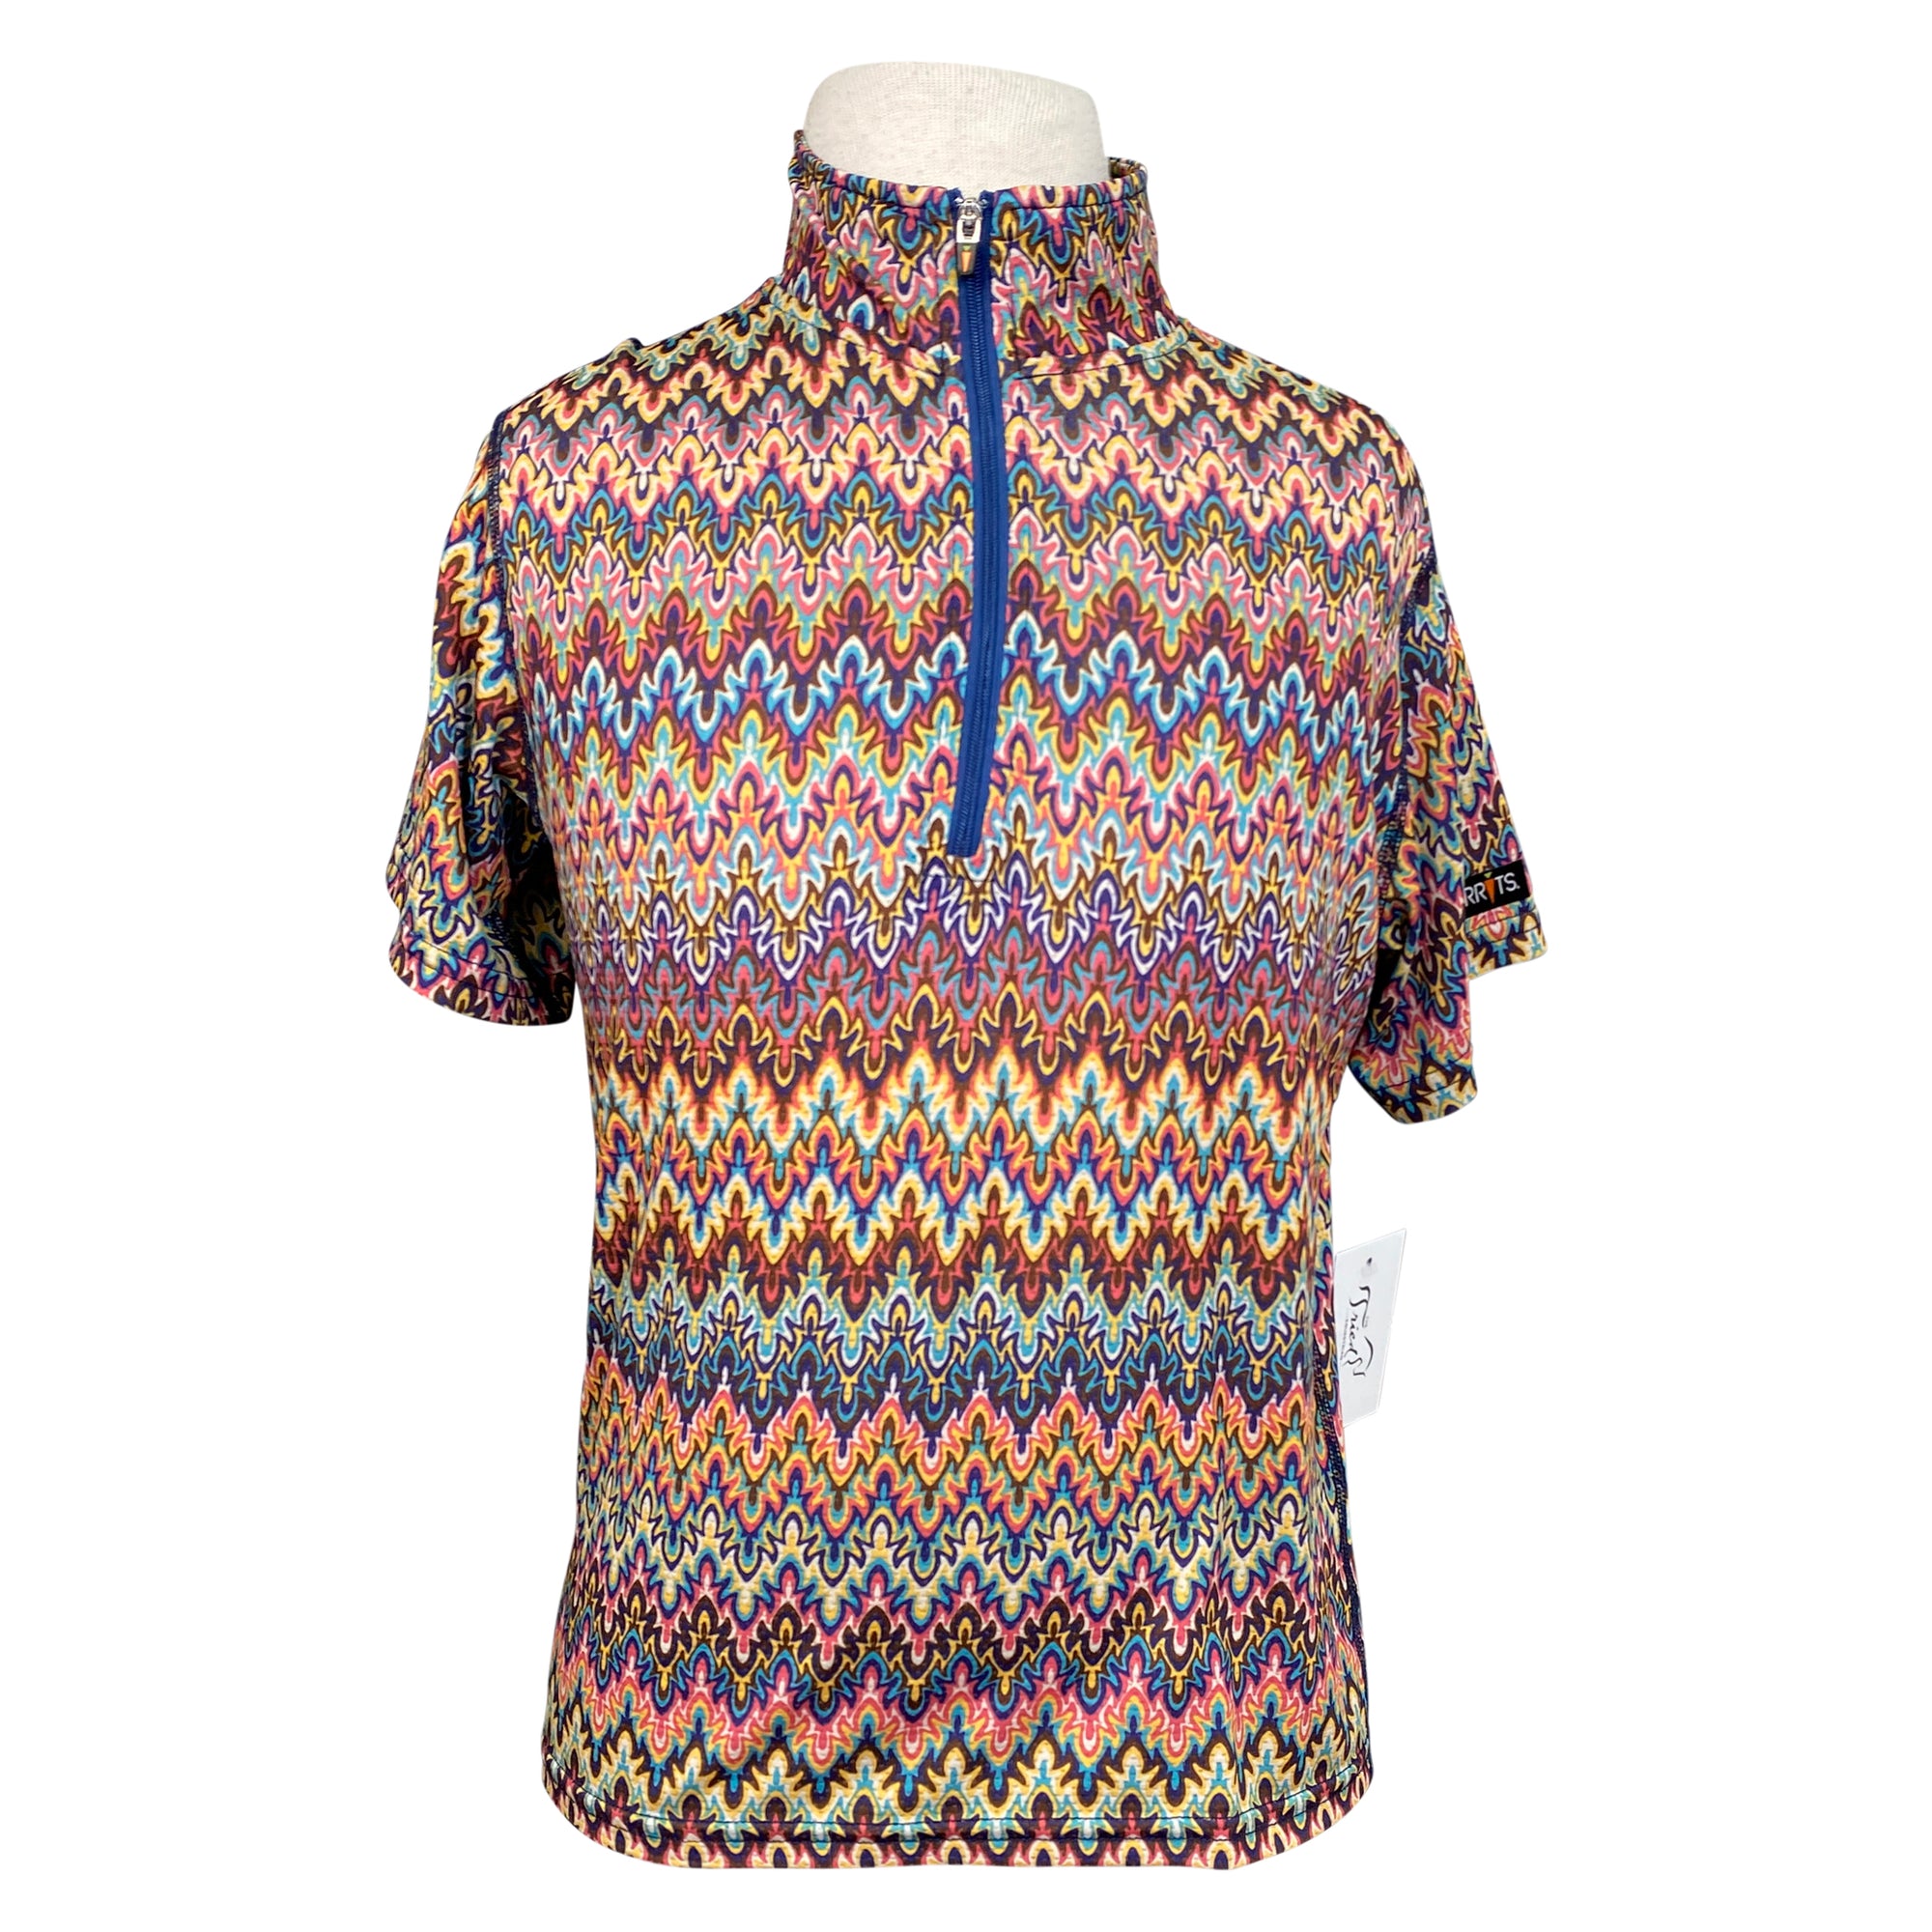 Kerrits 'Aire Ice Fil' Shirt in Western Aztec